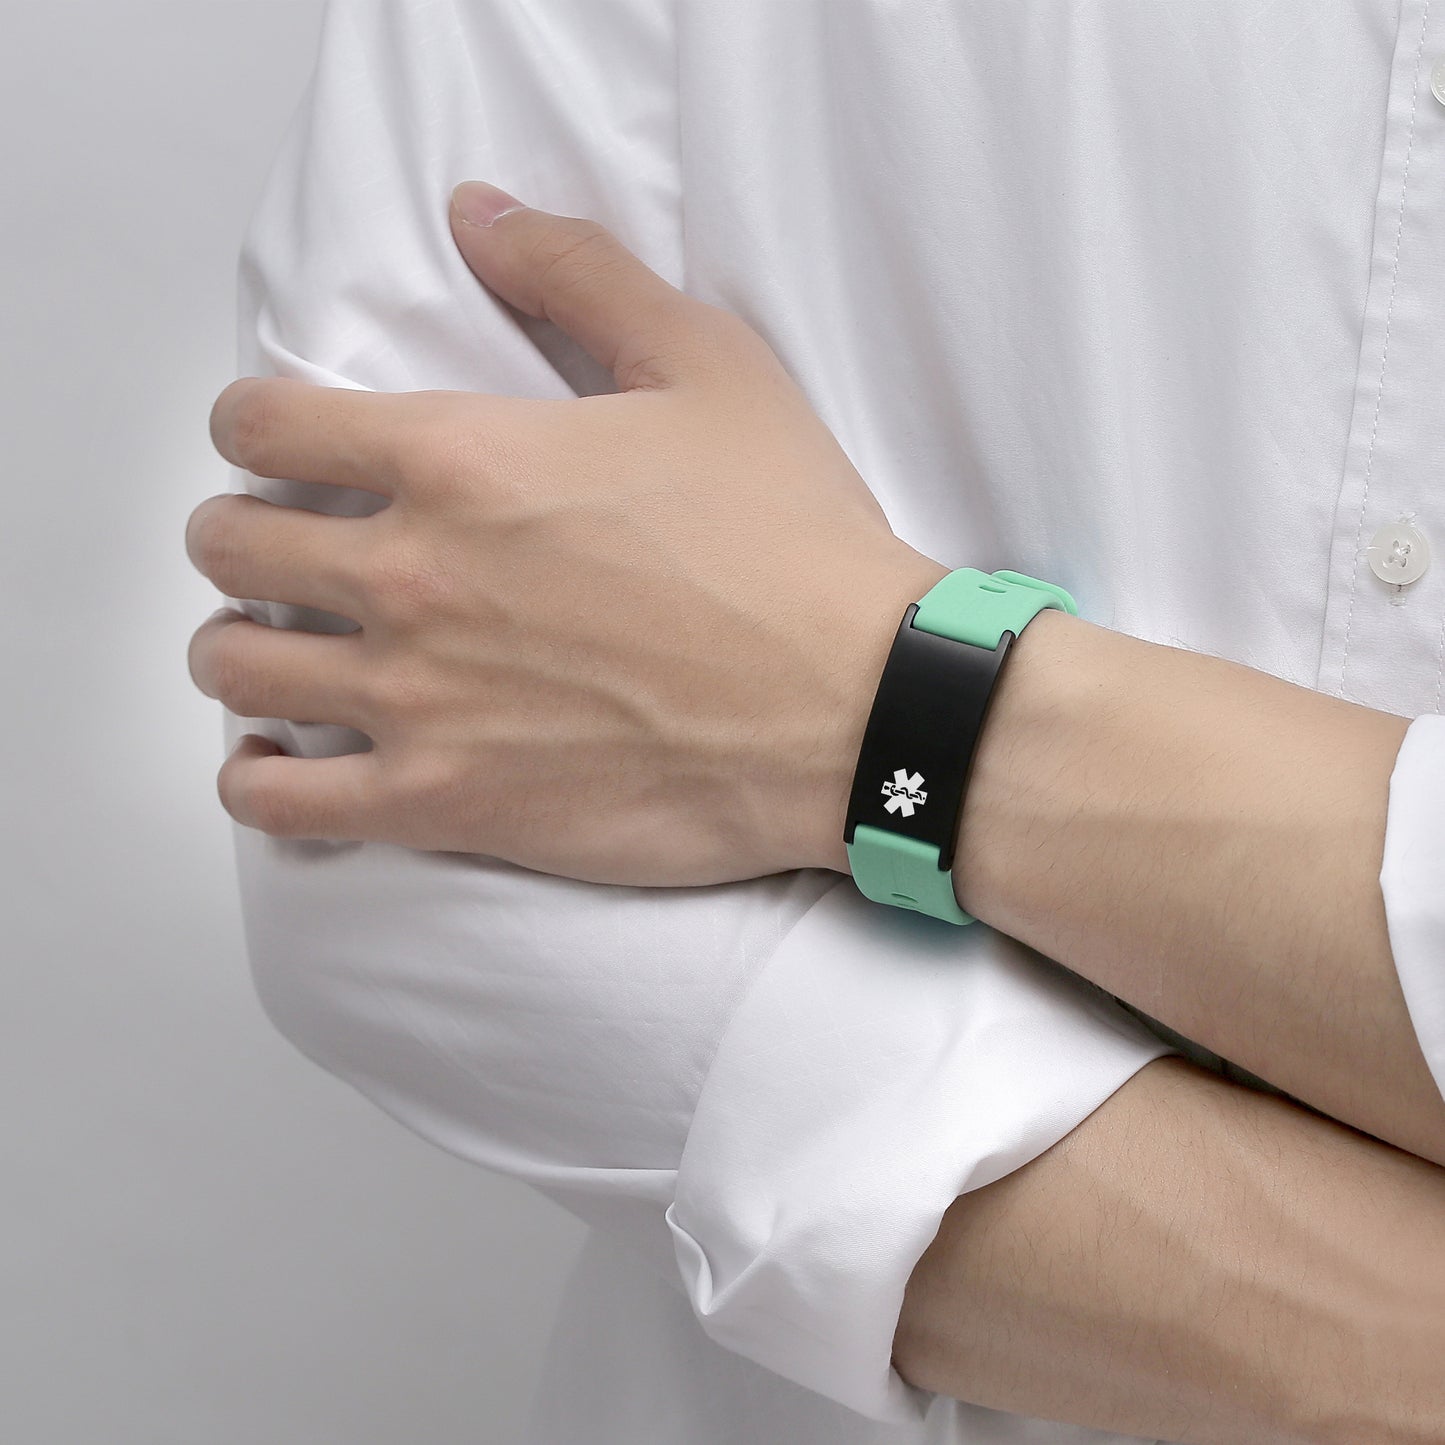 MyID Wristband WHITE with FREE online DETAILED profile.